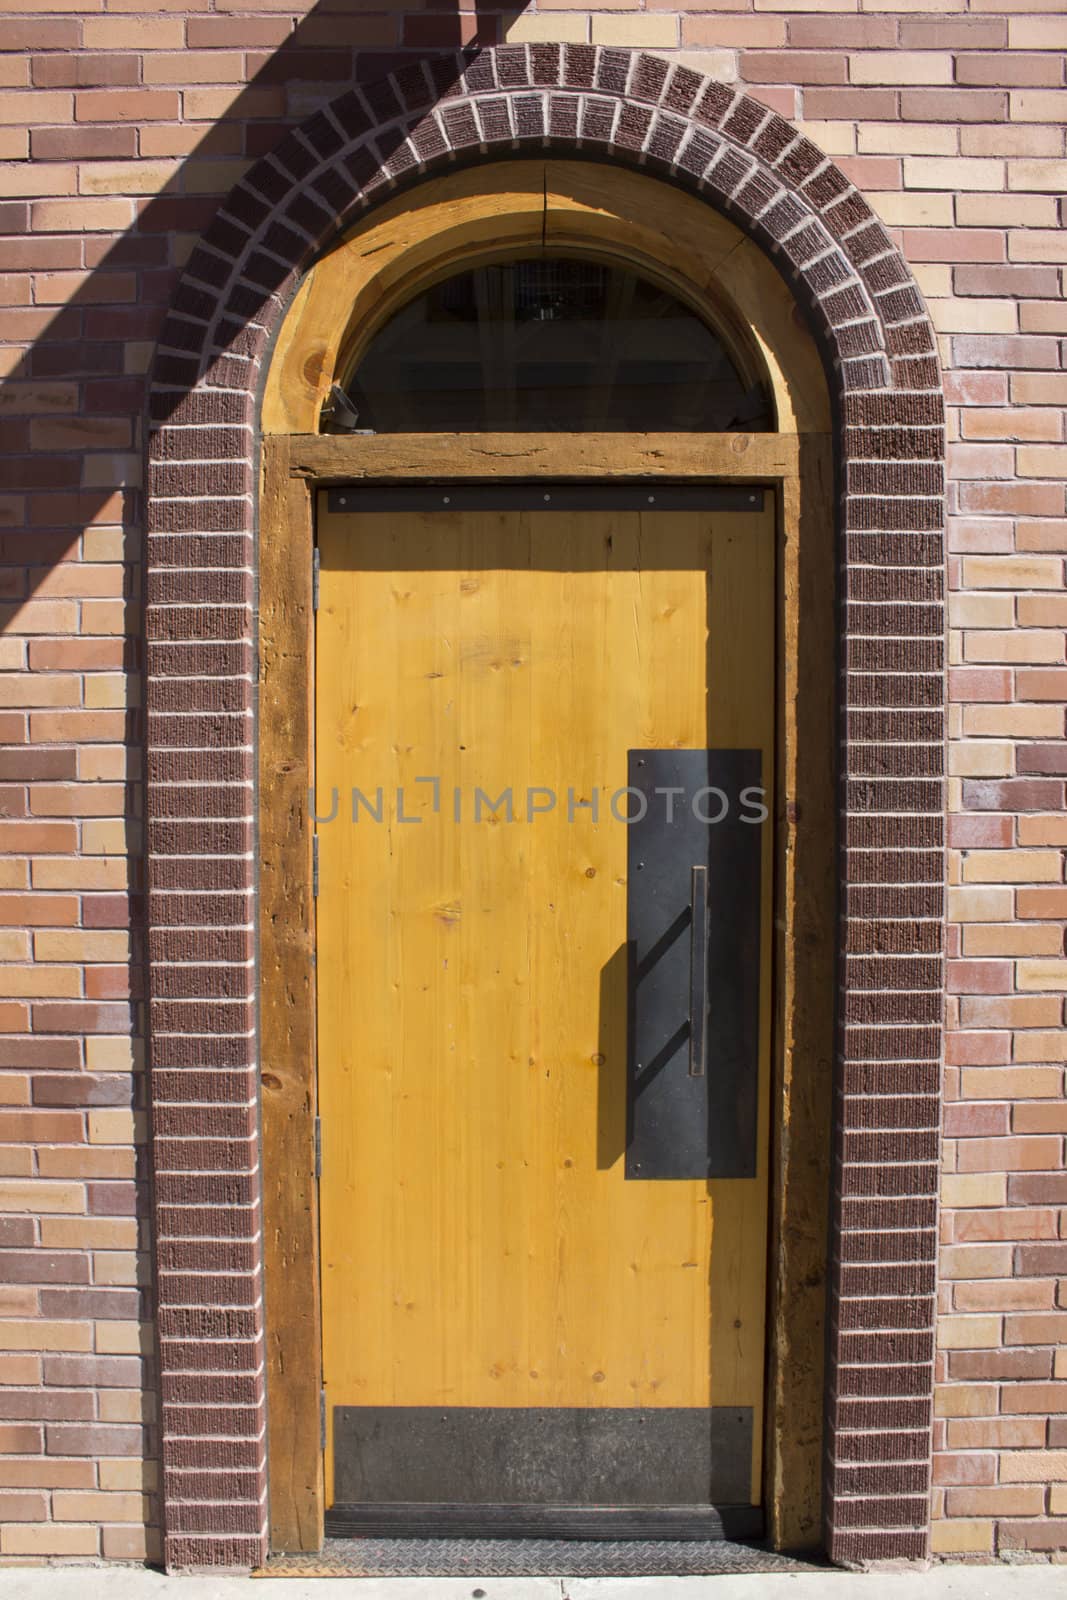 A brick door with an arch in a brick building.